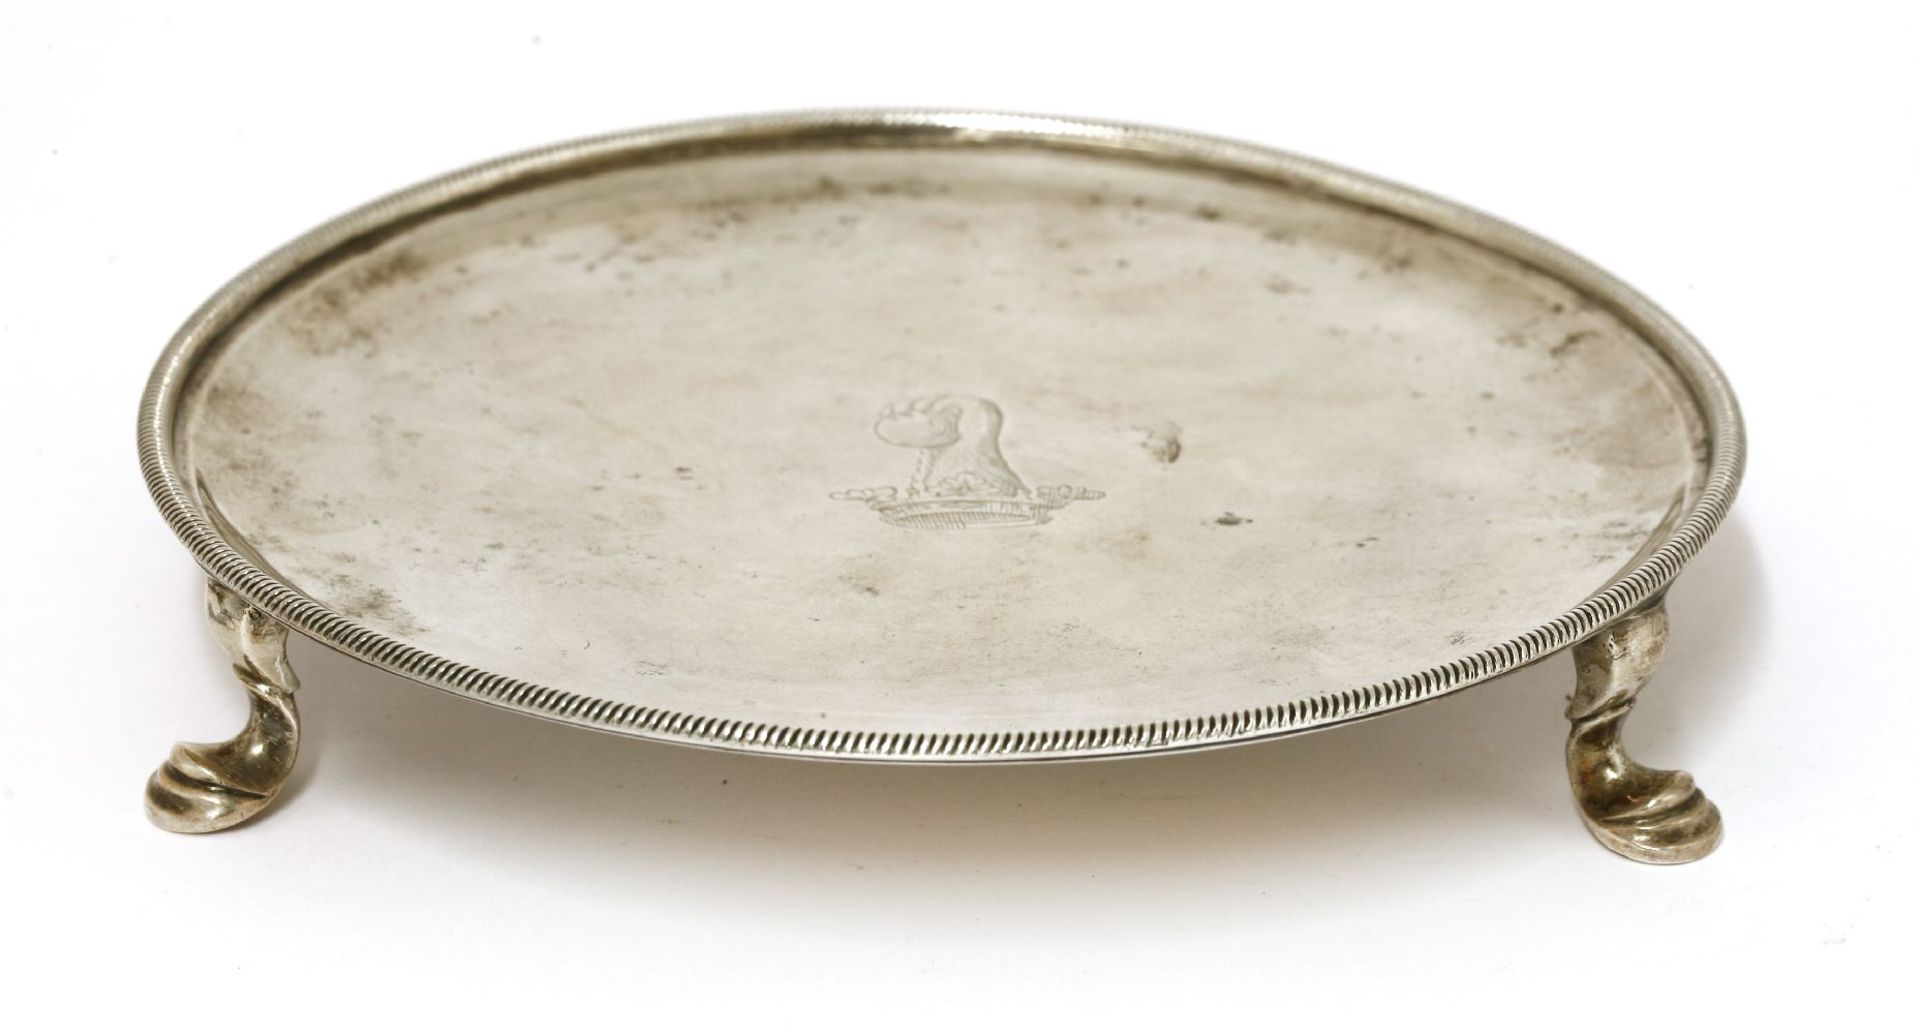 A George II silver card tray,by John Robinson II, London 1747, with an engraved crest within a